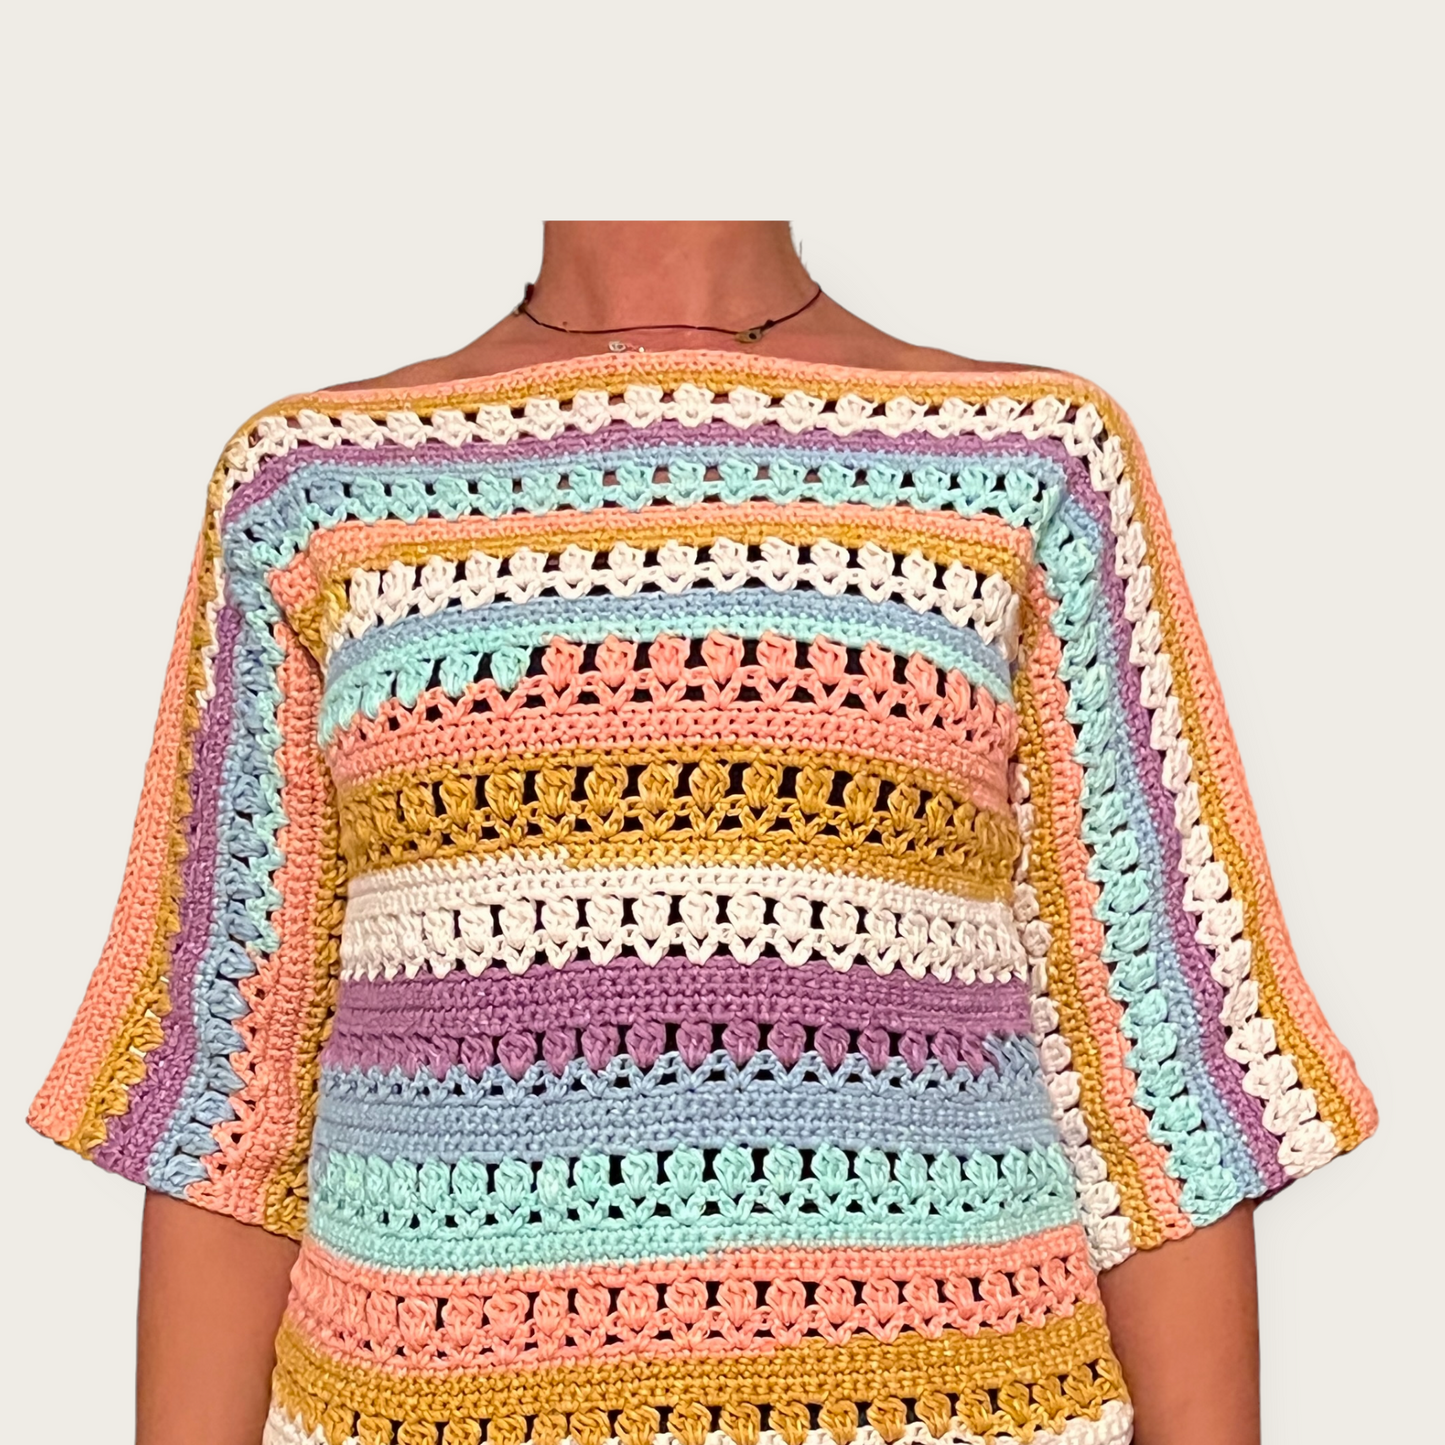 The Sherbet Sweater